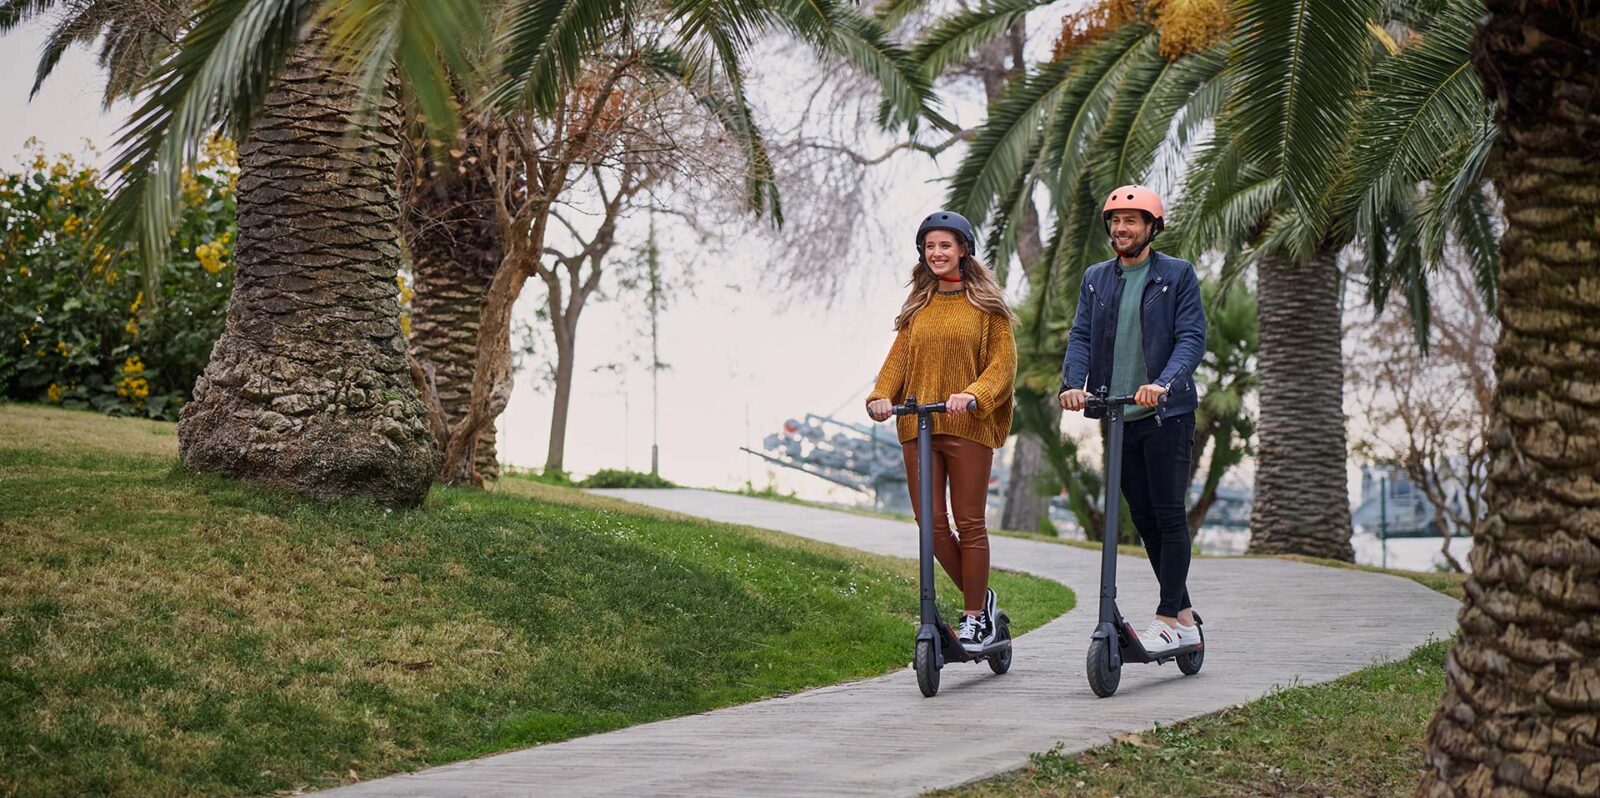 man and a woman riding a Segway Ninebot scooter in the park